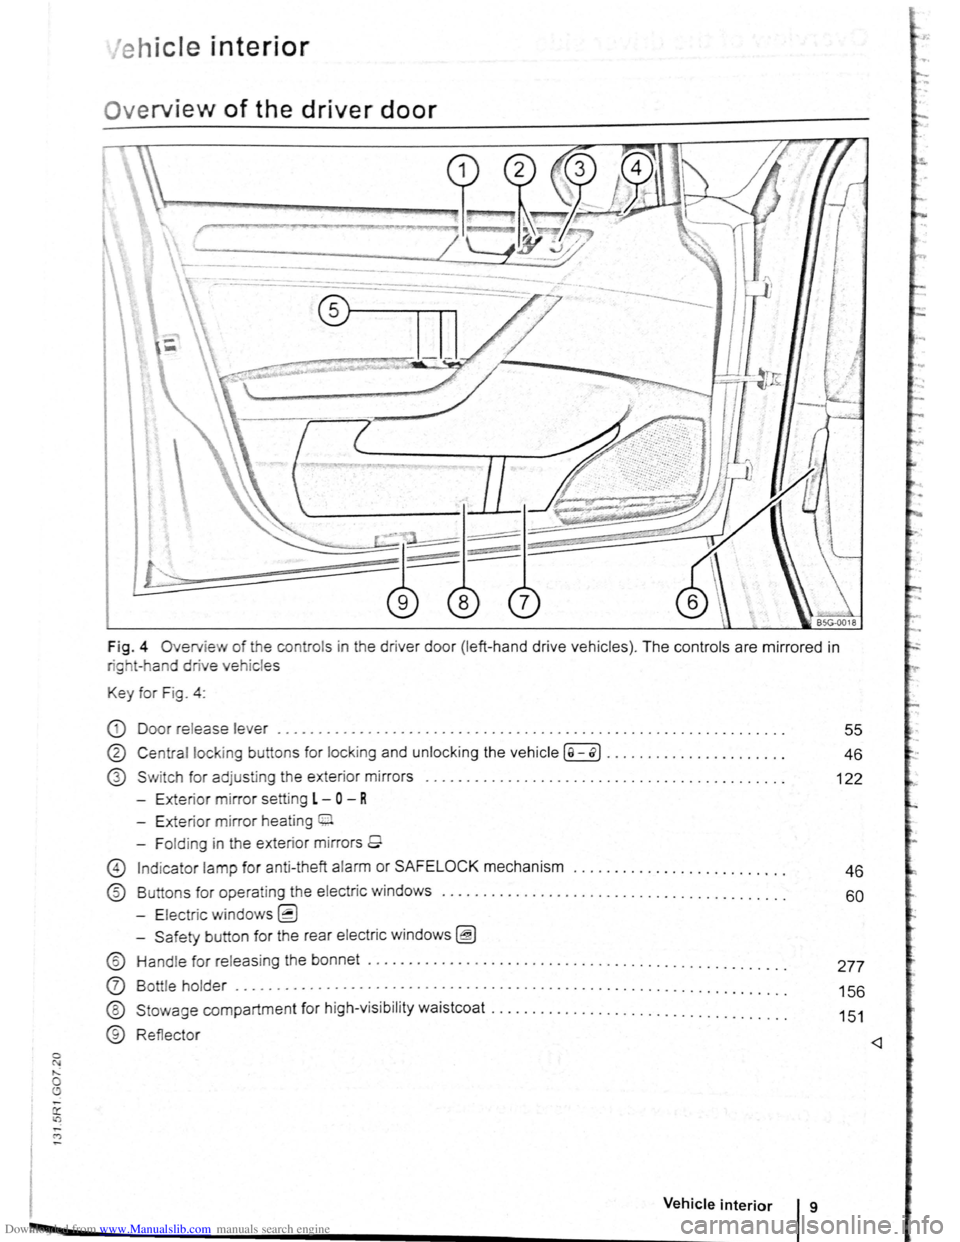 VOLKSWAGEN BEETLE 2007  Owners Manual Downloaded from www.Manualslib.com manuals search engine 0 N ,..; 0 
e h ic le interior 
Ov erview of the driver door 
Fig . 4 Overv ie w of the  contro ls  in  the drive r doo r (left -ha nd  dr ive